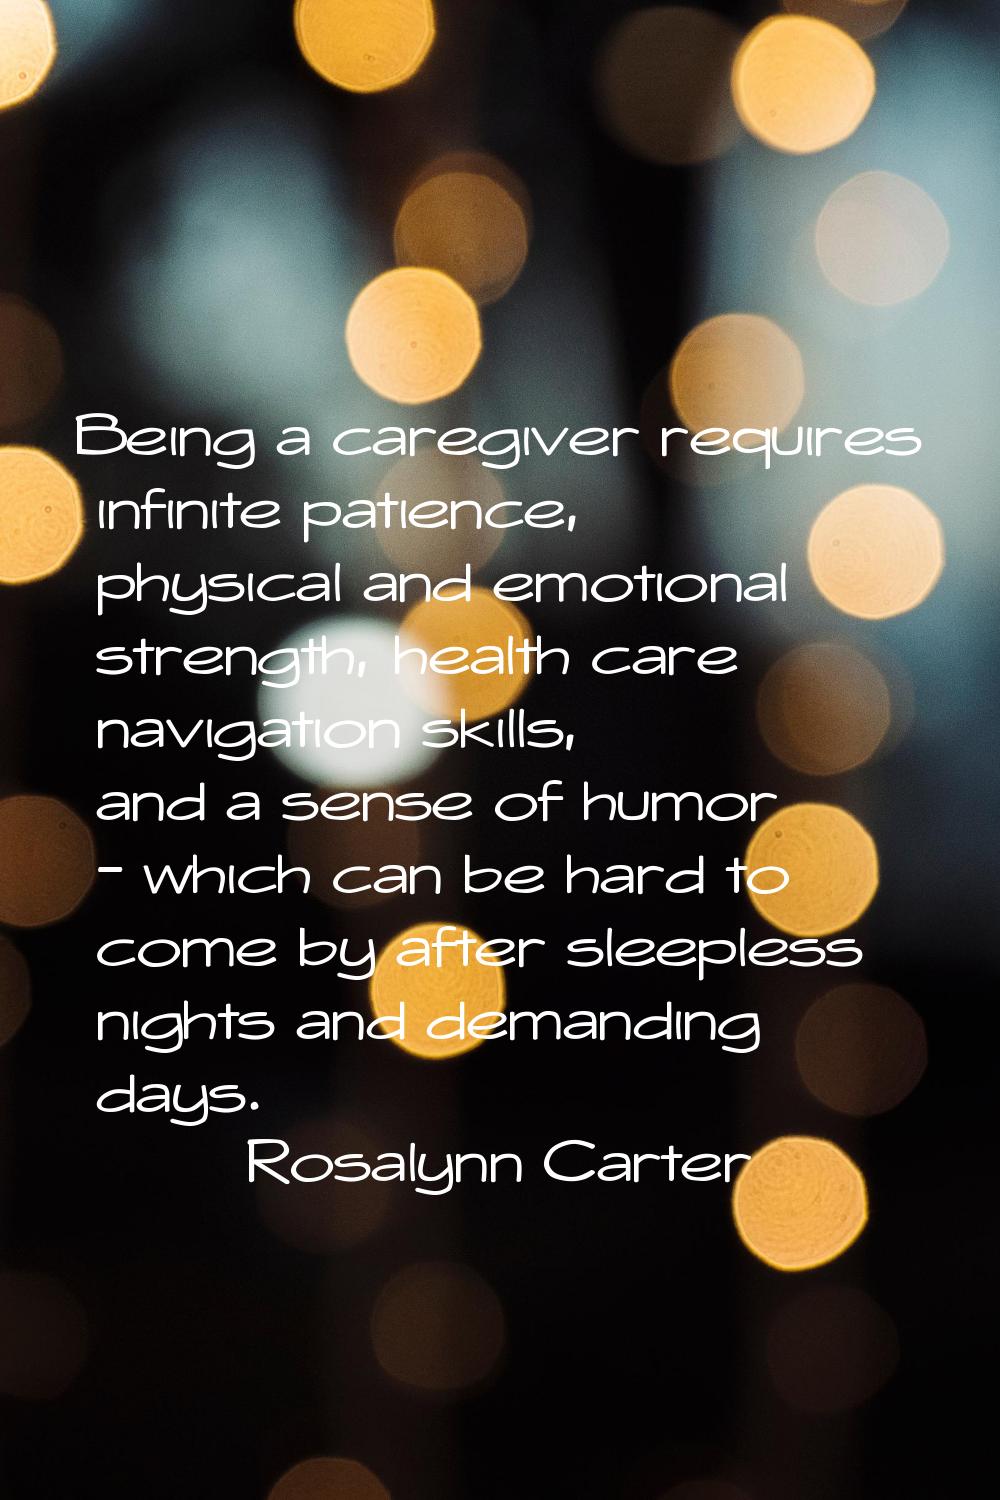 Being a caregiver requires infinite patience, physical and emotional strength, health care navigati